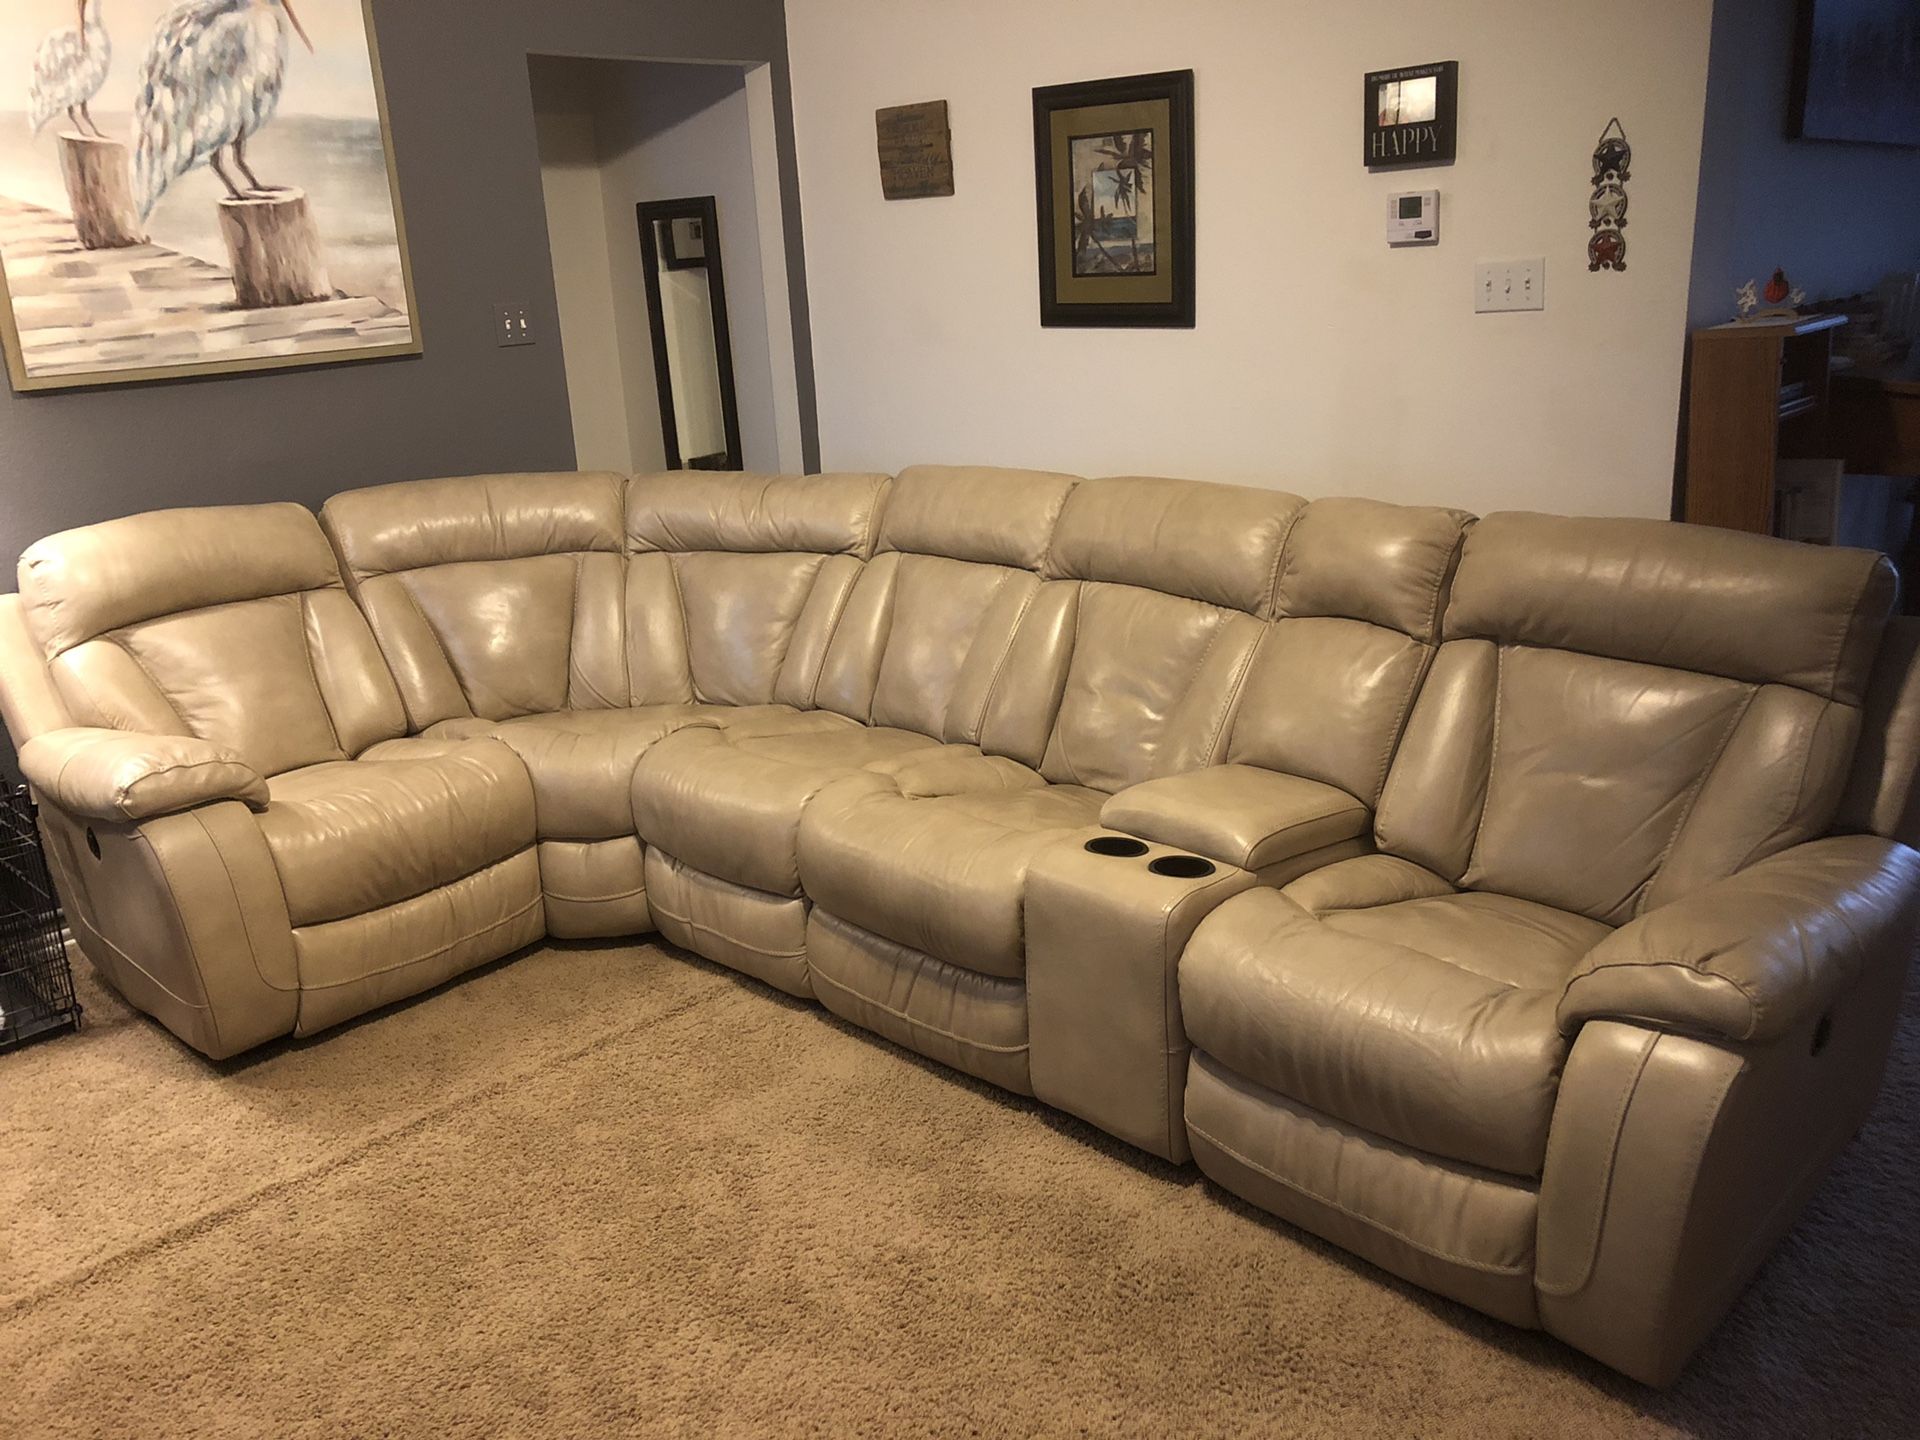 MUST SELL! Make an offer. Leather 6-piece powered sectional